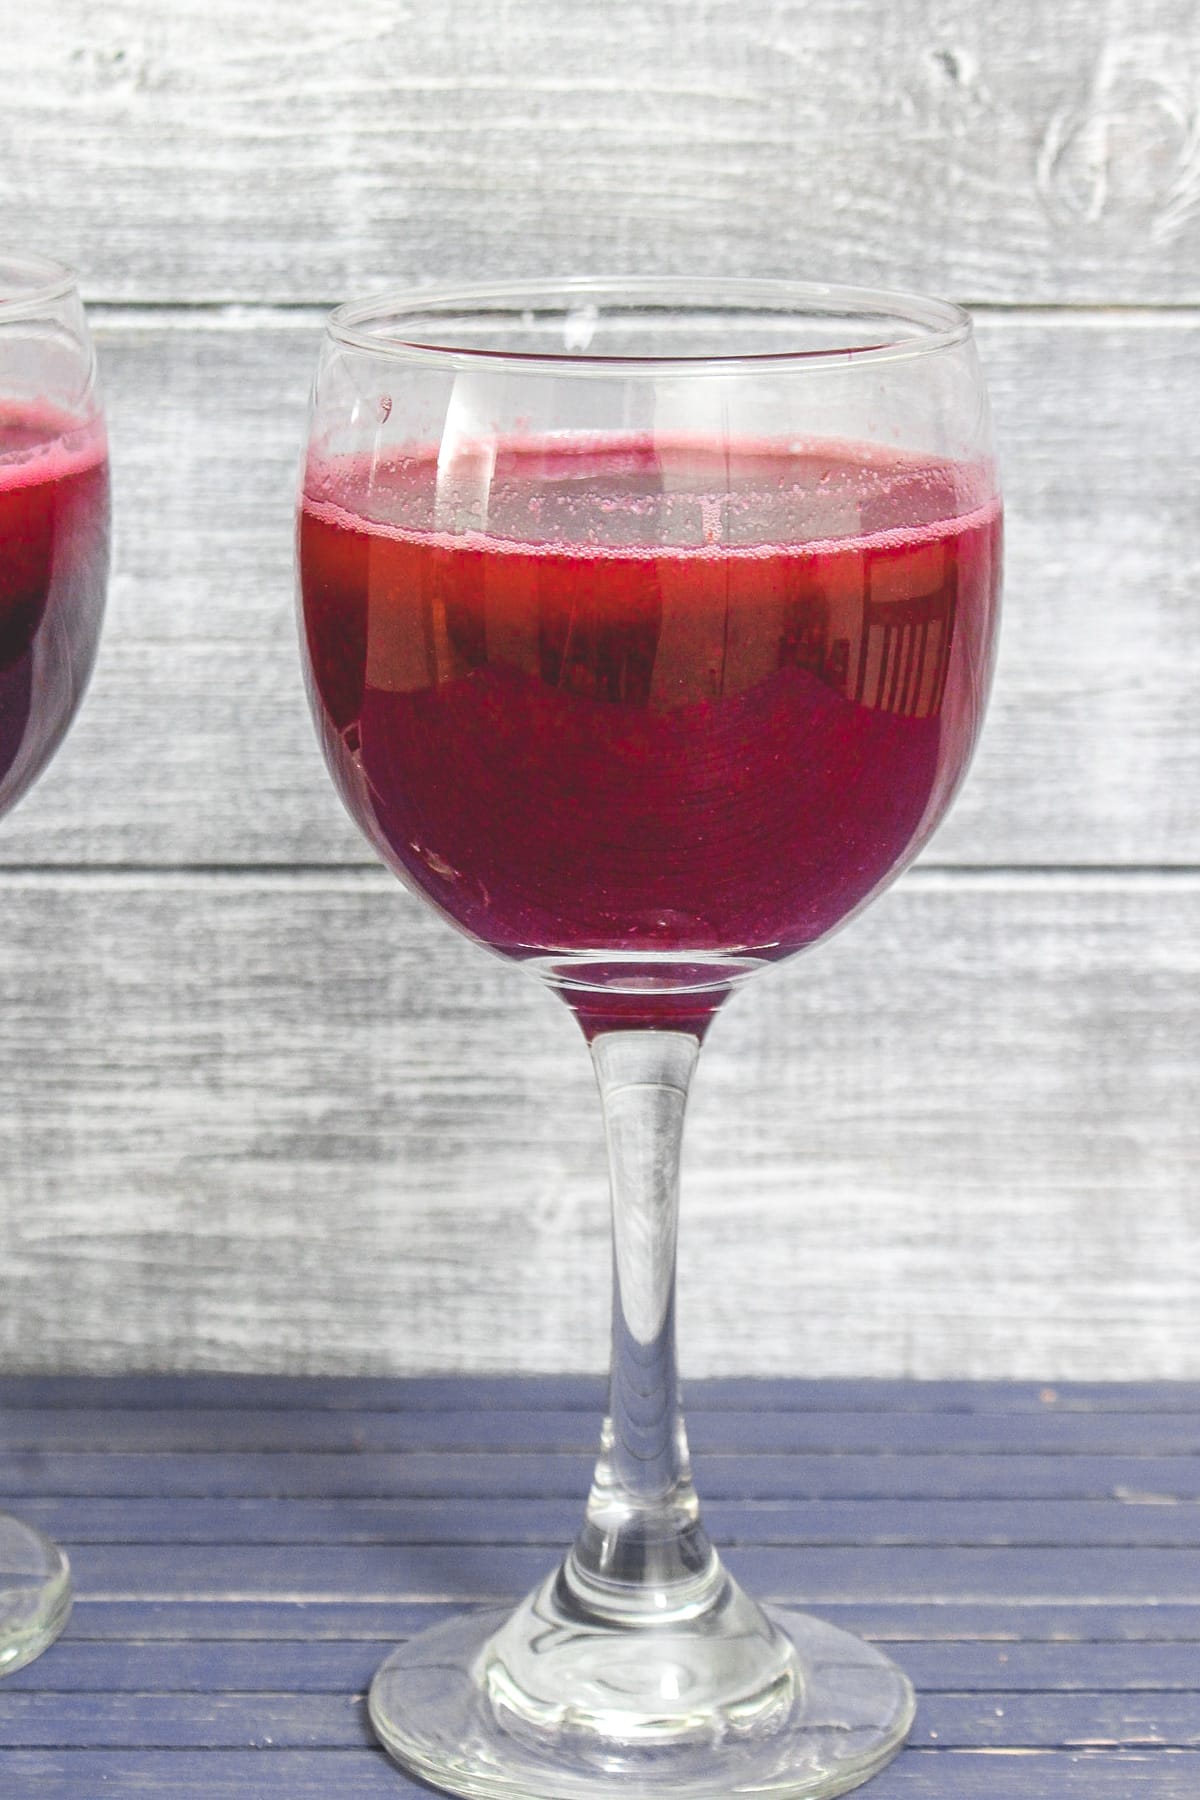 A glass of pomegranate juice with another glass on the side.